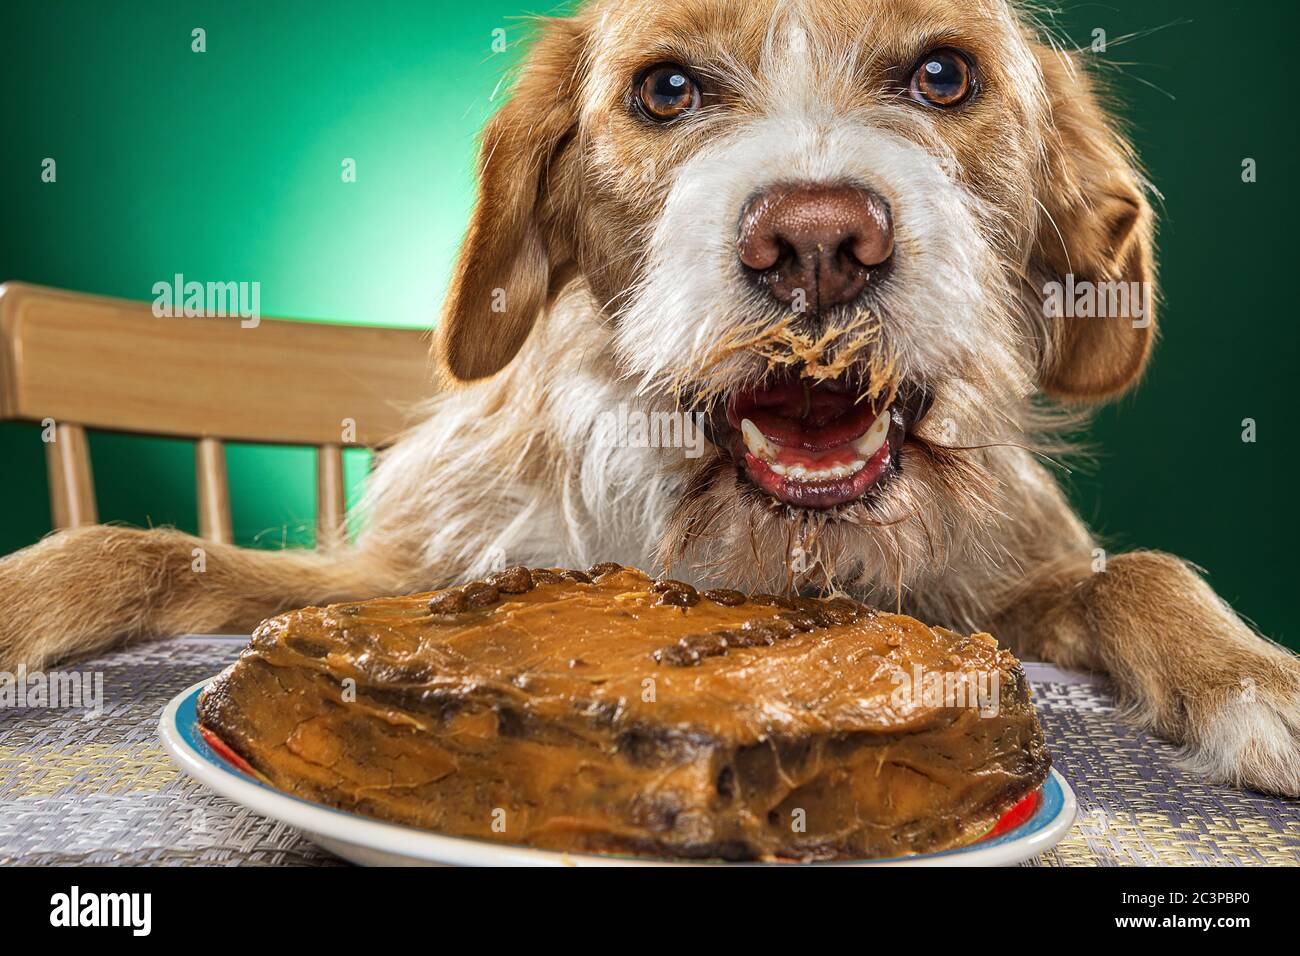 Closeup shot of a cute dog eating a cake on a green background ...